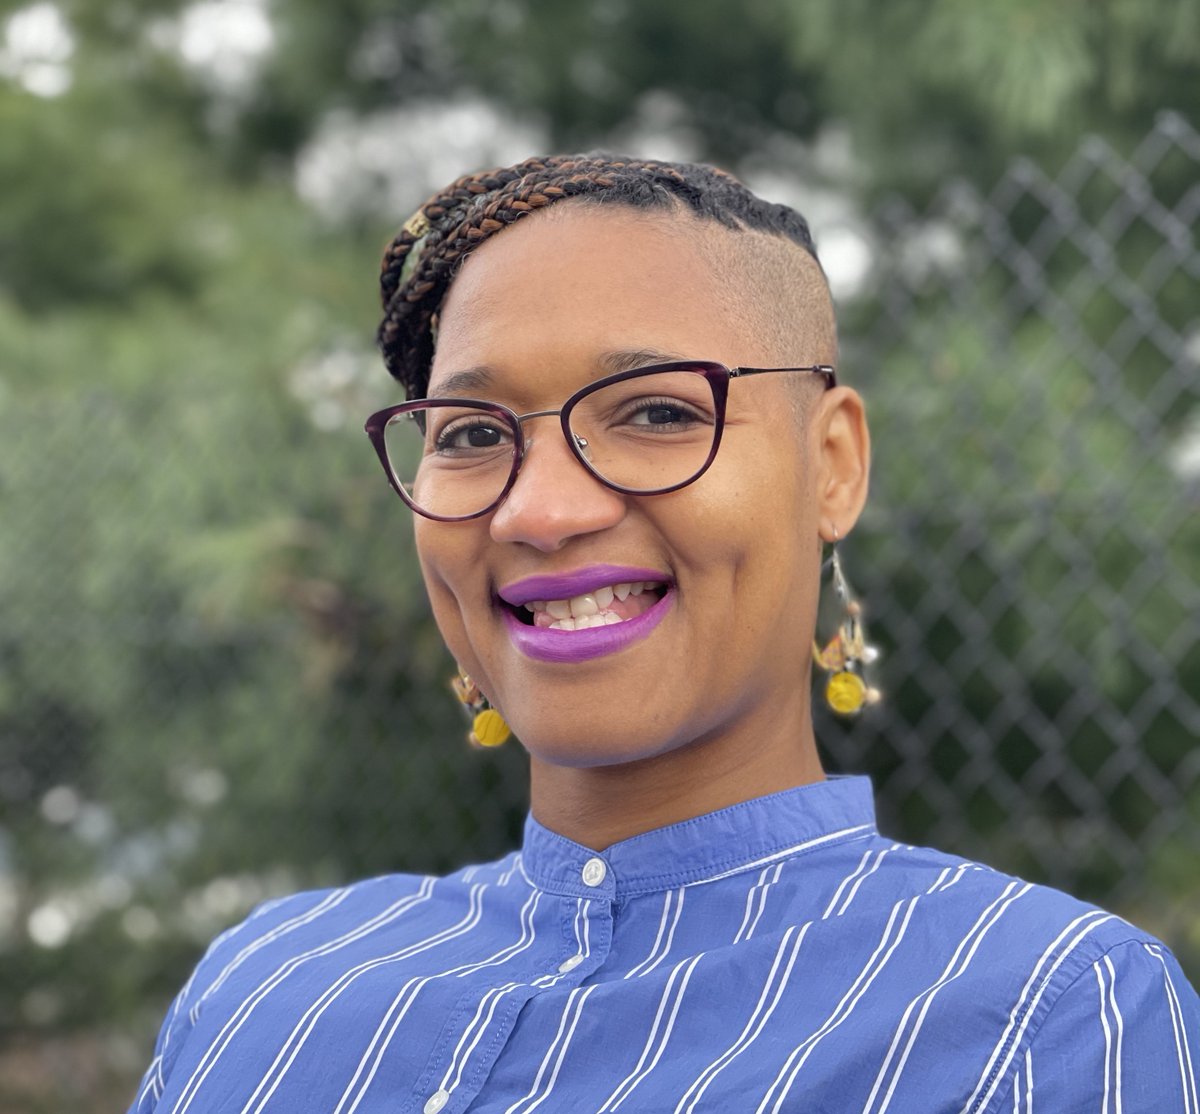 The Faculty Speaker for our 2024 Commencement Ceremony is Dr. karen g. williams, Assistant Professor of Anthropology here at Guttman Com­munity College. We look forward to hearing from her on Commencement day! #Commencement2024 #GuttmanProud #GuttmanCC #CUNY